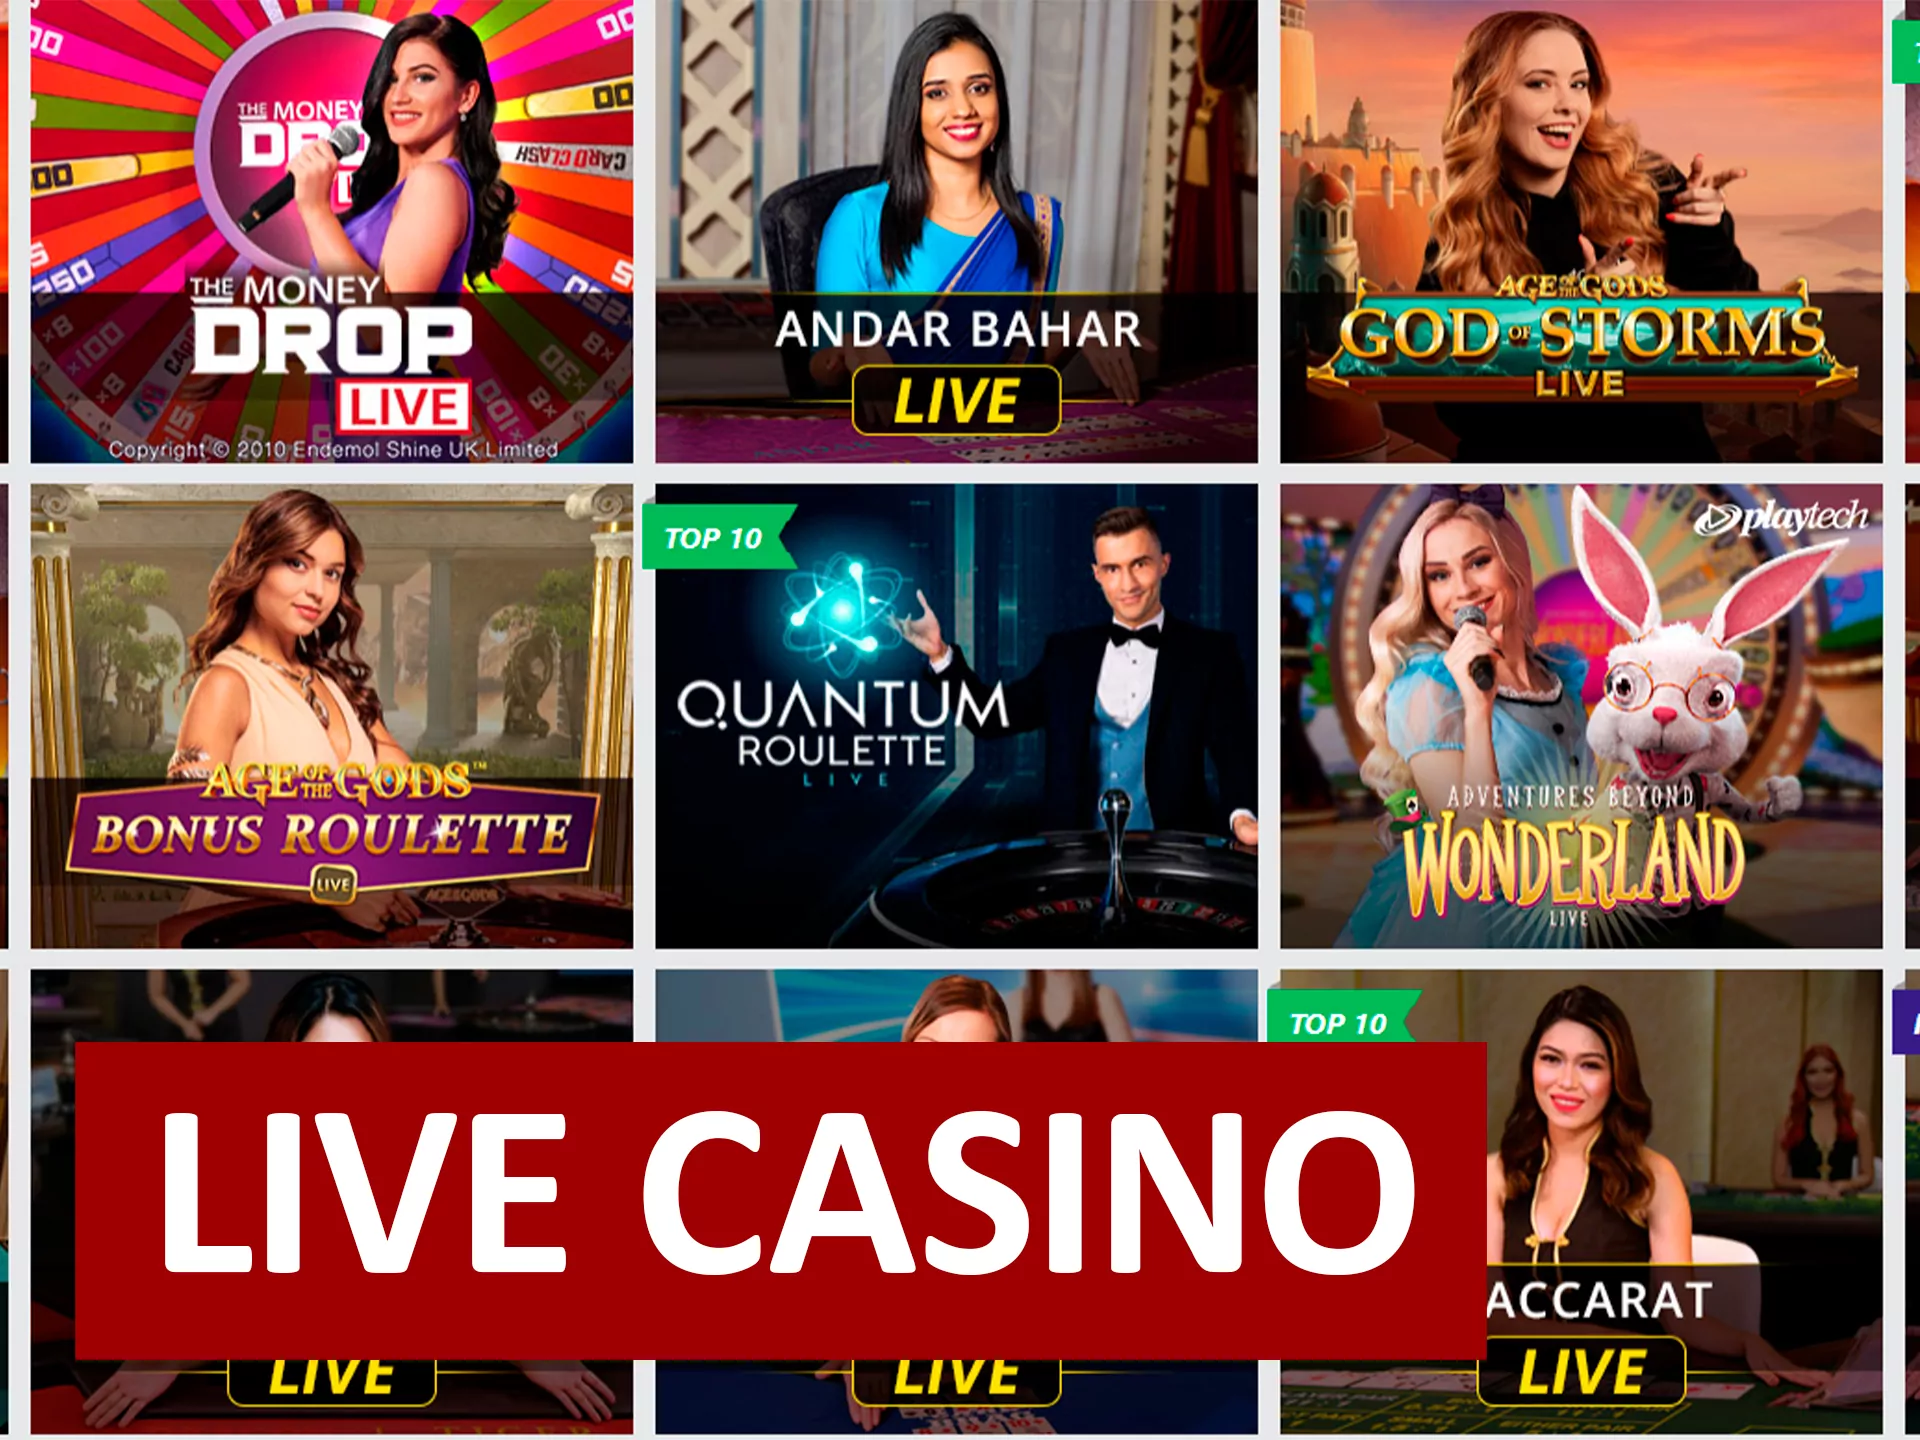 Play with real dealers in the Dafabet live casino section.